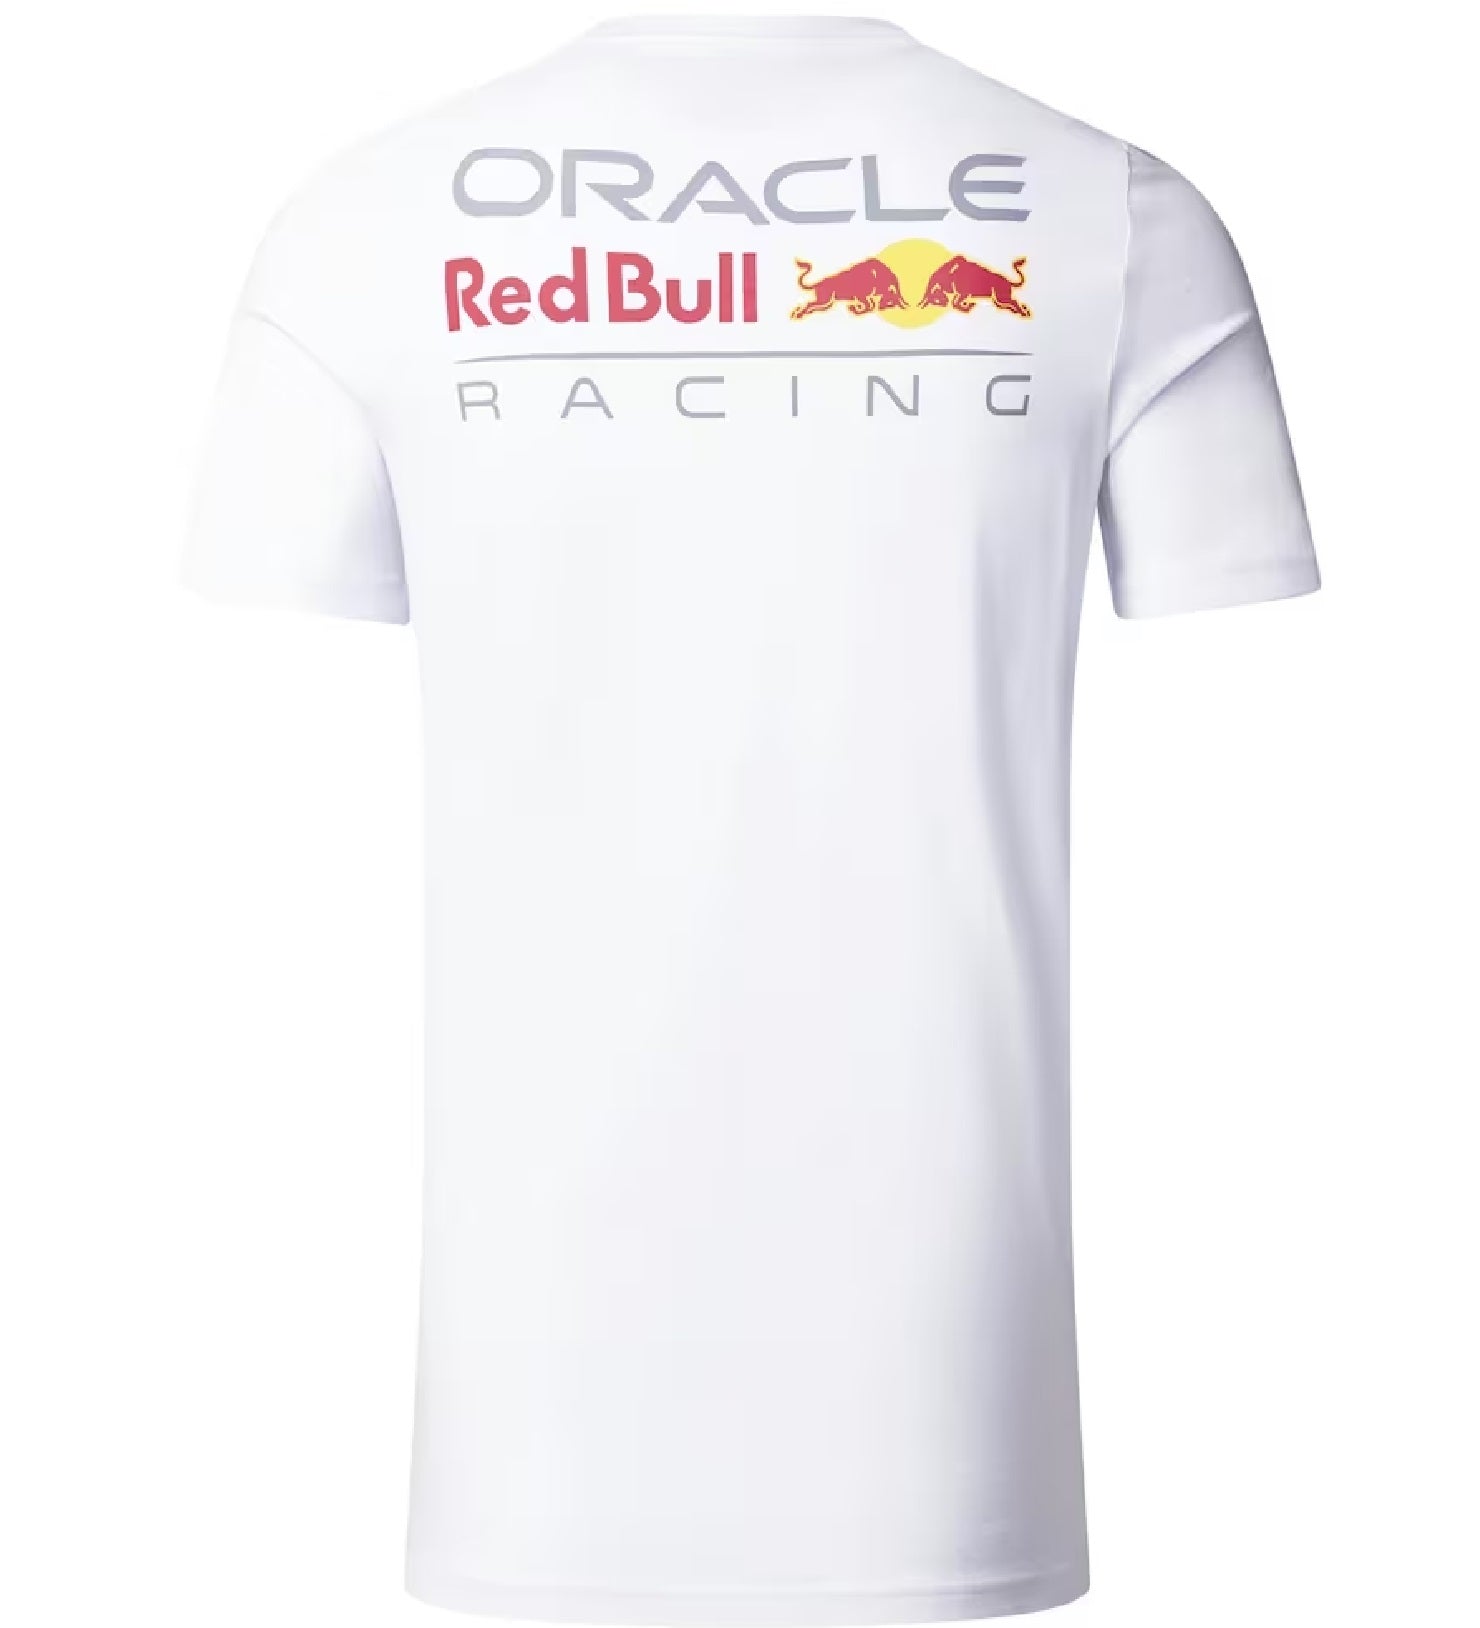 Castore Oracle T Shirt | Red Bull Racing Shirt | Formula 1 Driver T Shirts | F1 Clothing | Color White | Best Wearing in Bahrain | Halabh.com